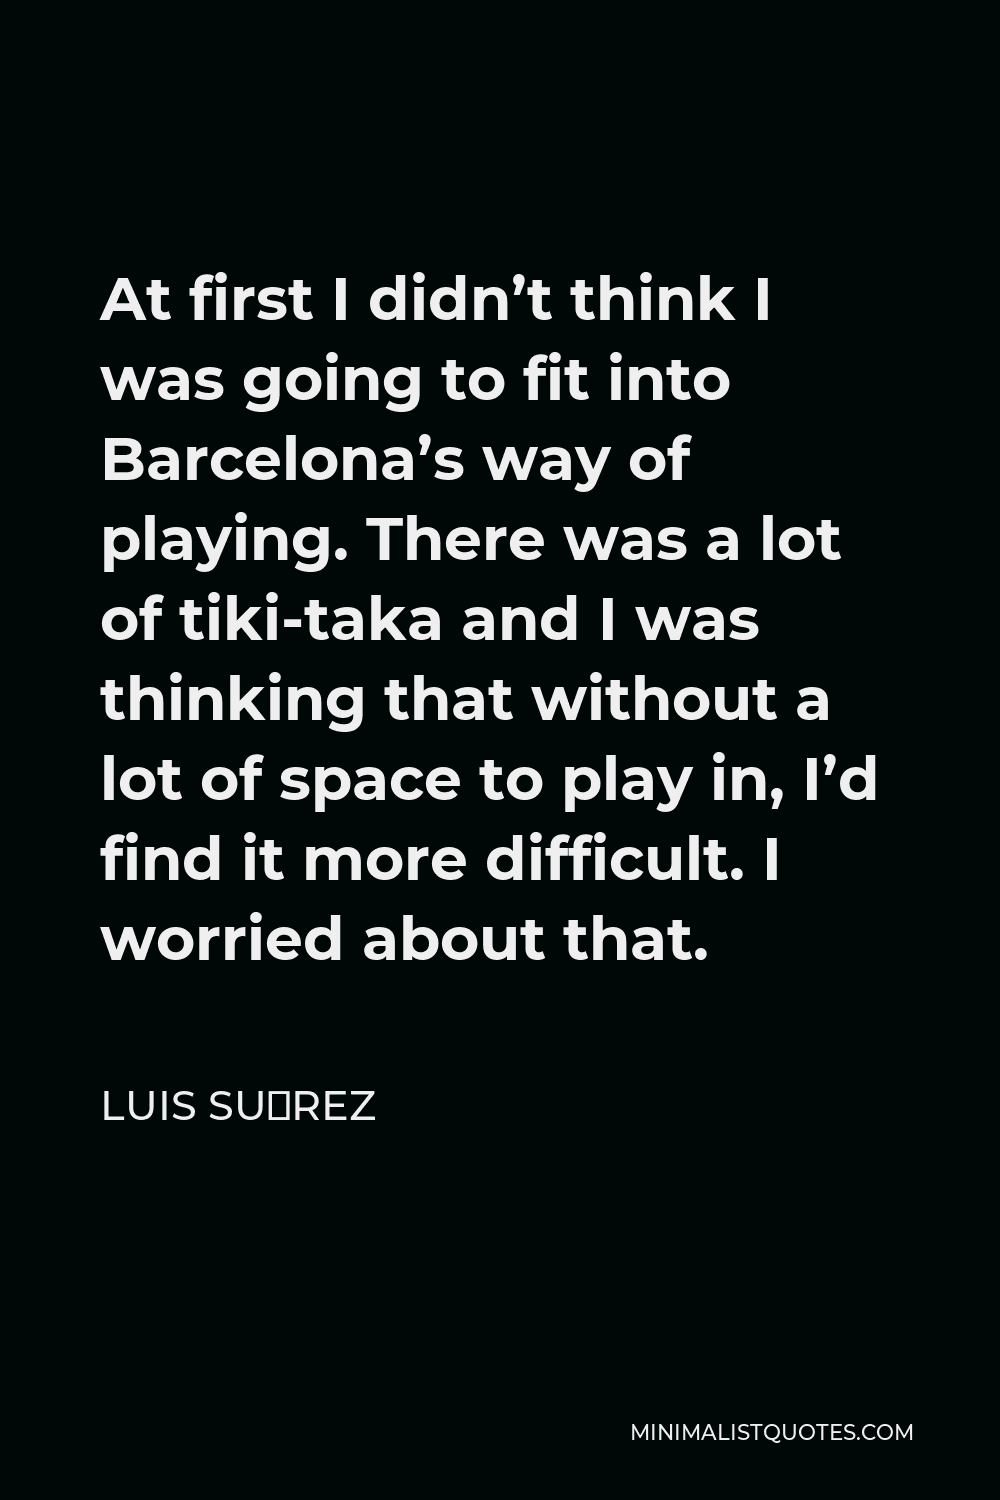 Luis Suárez Quote - At first I didn’t think I was going to fit into Barcelona’s way of playing. There was a lot of tiki-taka and I was thinking that without a lot of space to play in, I’d find it more difficult. I worried about that.